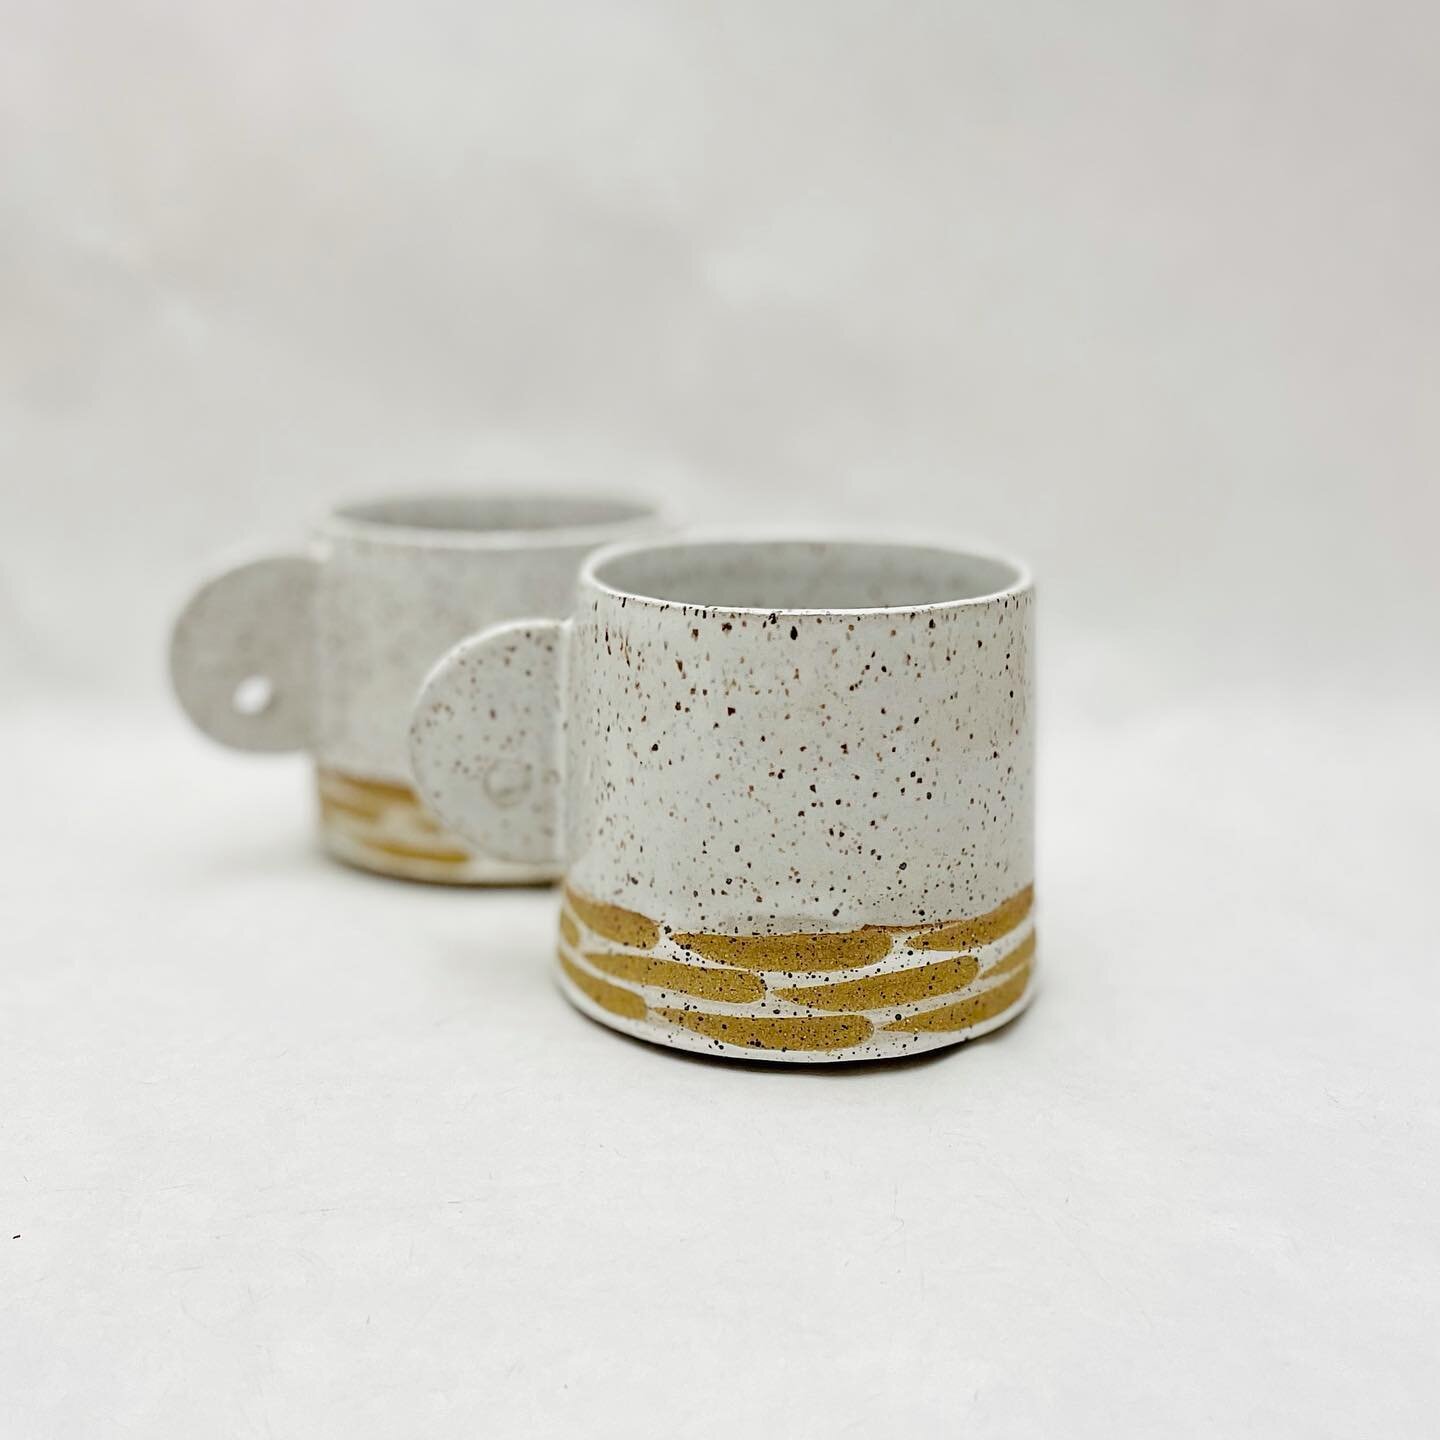 New cups and more of my ceramic pieces are available to purchase @practicalartphx.